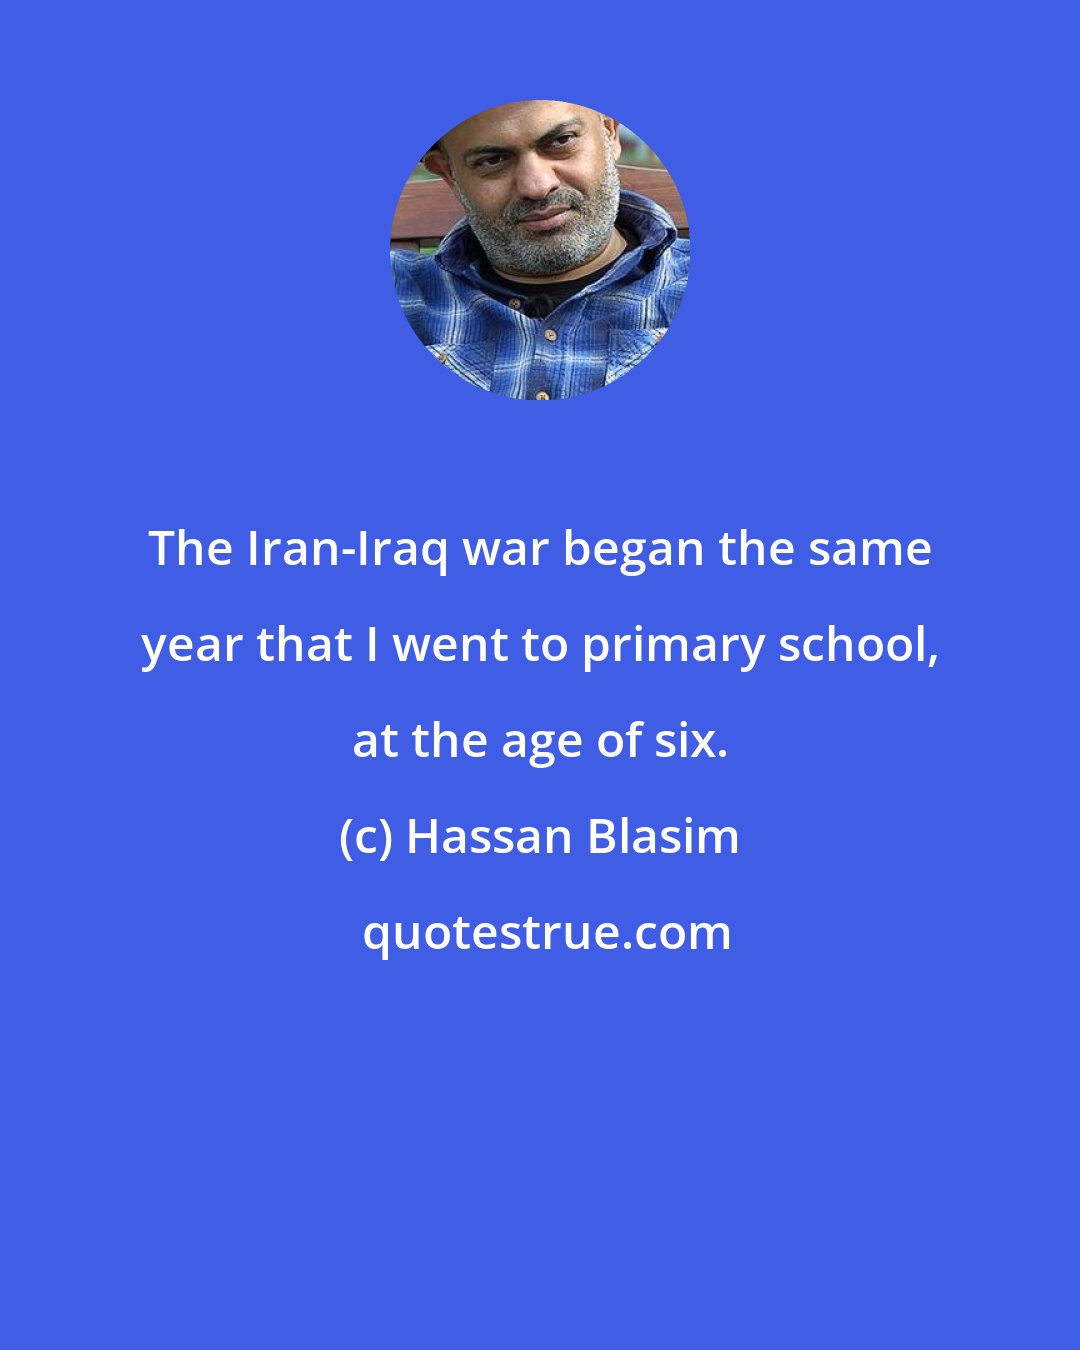 Hassan Blasim: The Iran-Iraq war began the same year that I went to primary school, at the age of six.